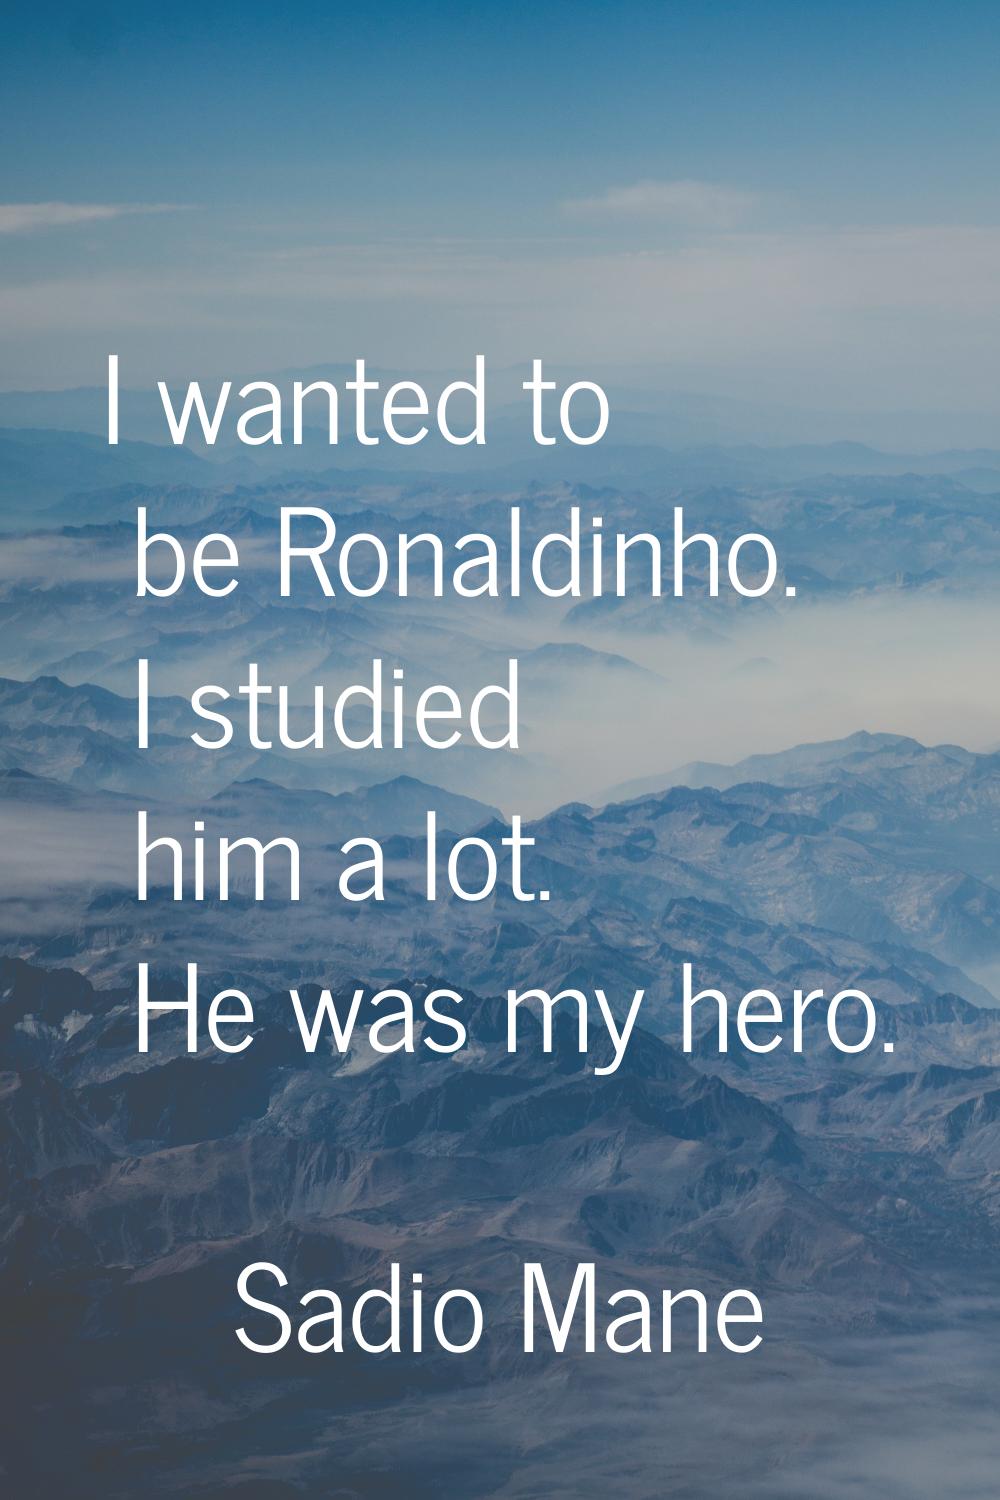 I wanted to be Ronaldinho. I studied him a lot. He was my hero.